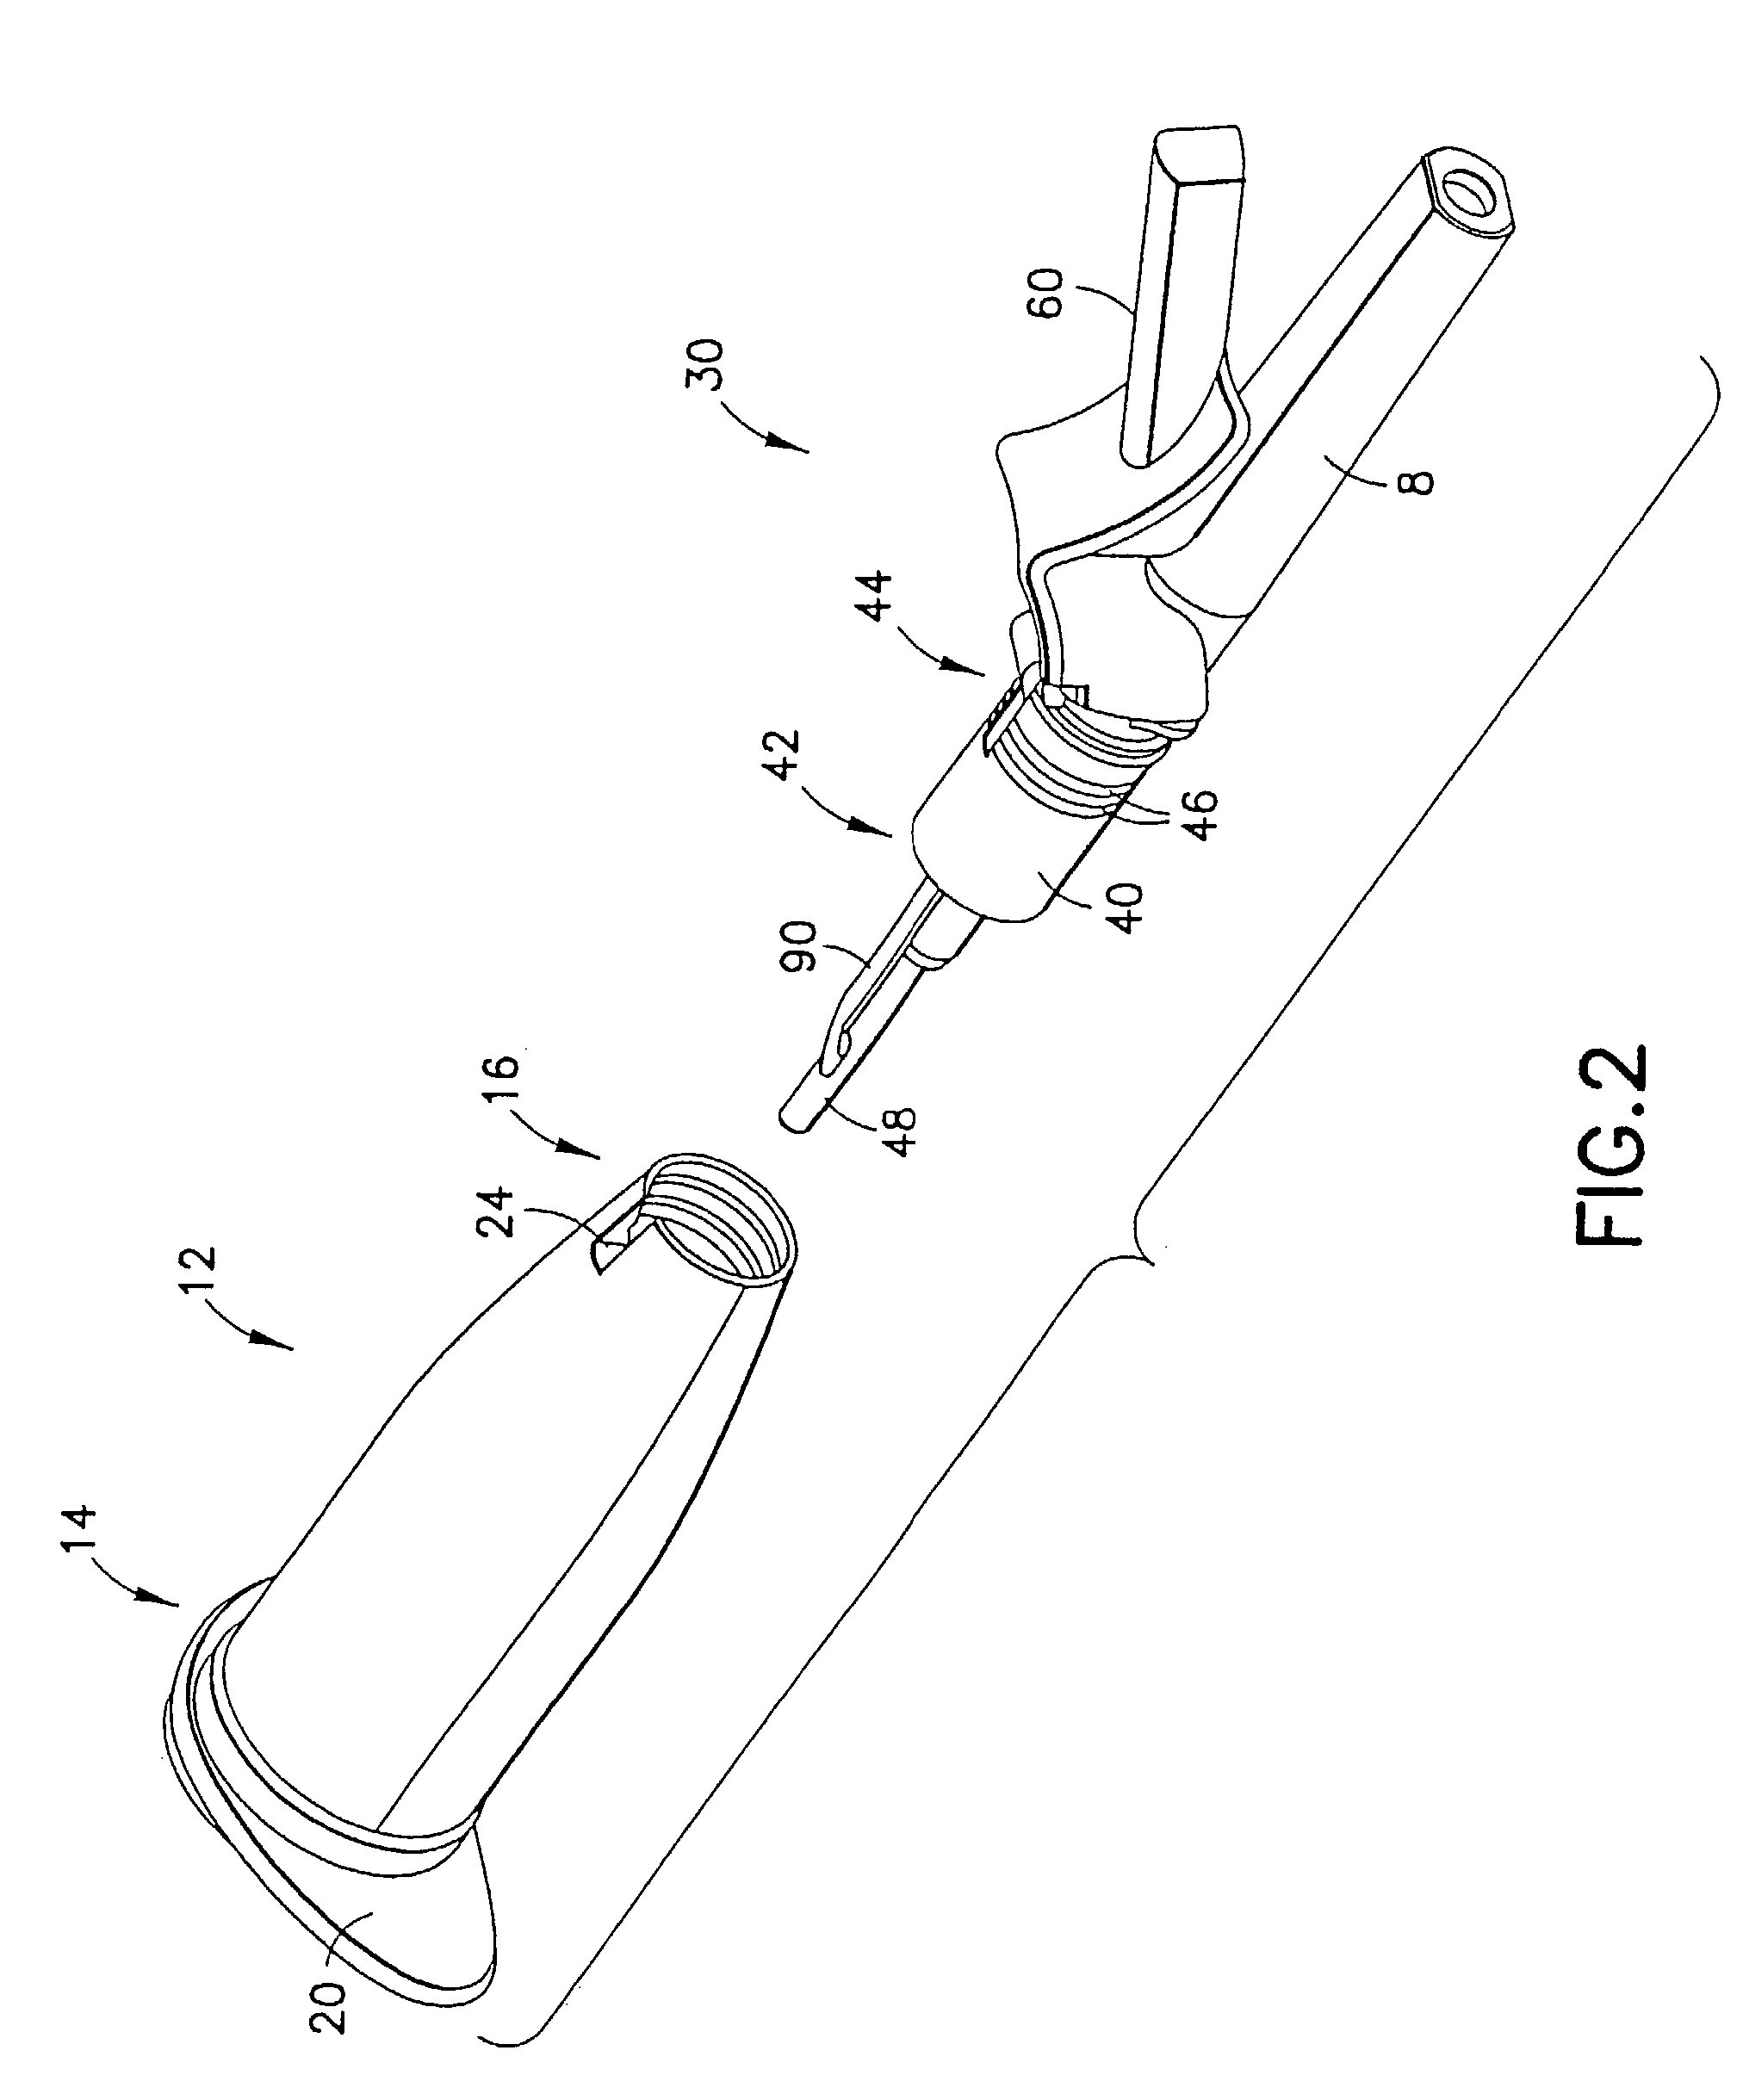 Safety needle assembly with passive pivoting shield